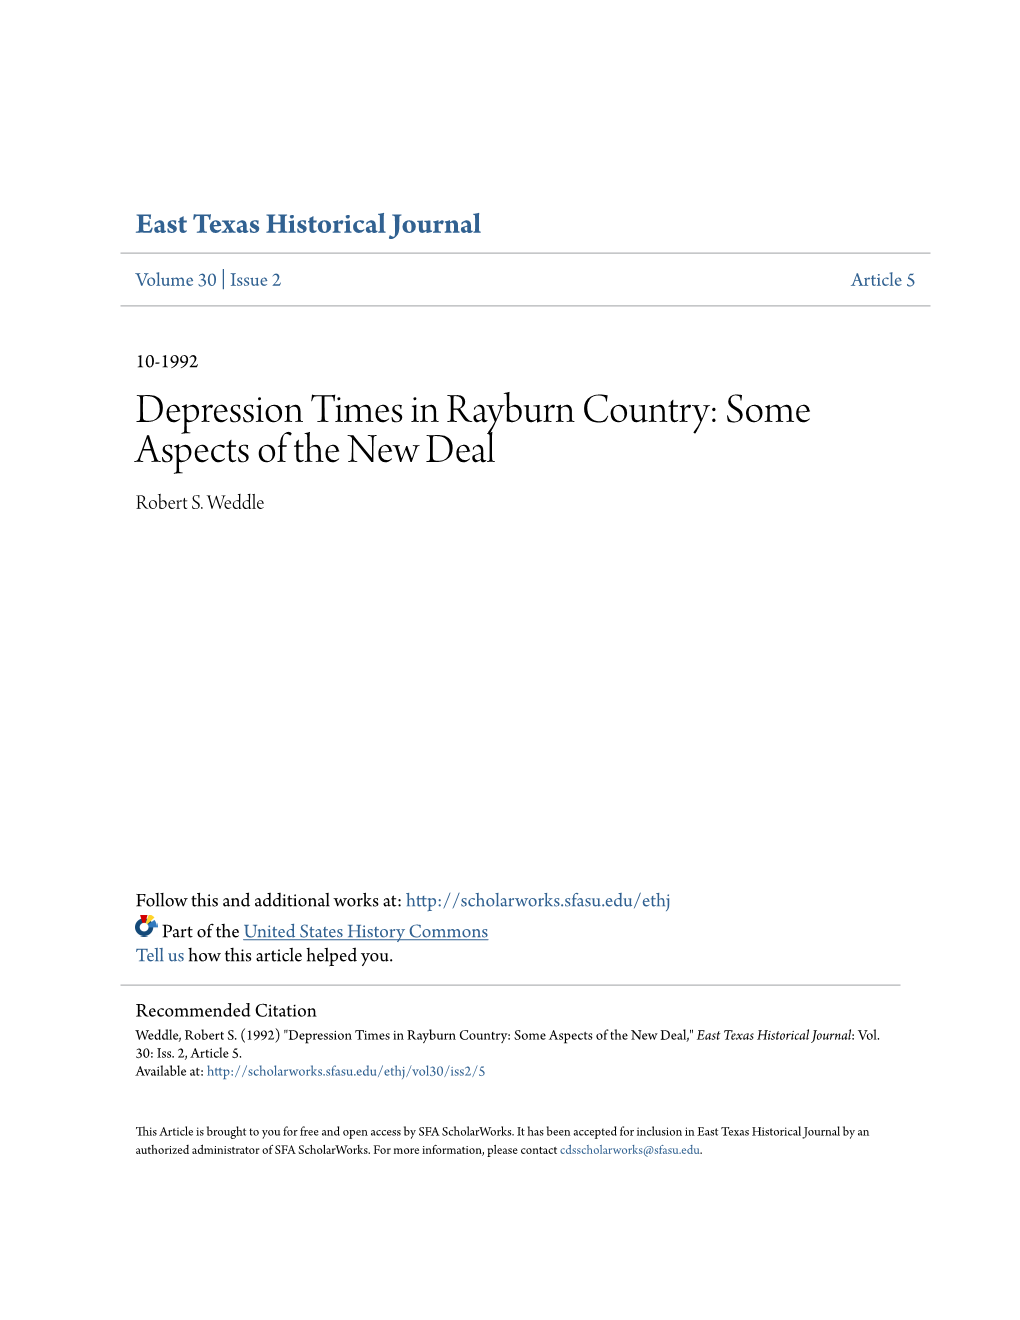 Depression Times in Rayburn Country: Some Aspects of the New Deal Robert S